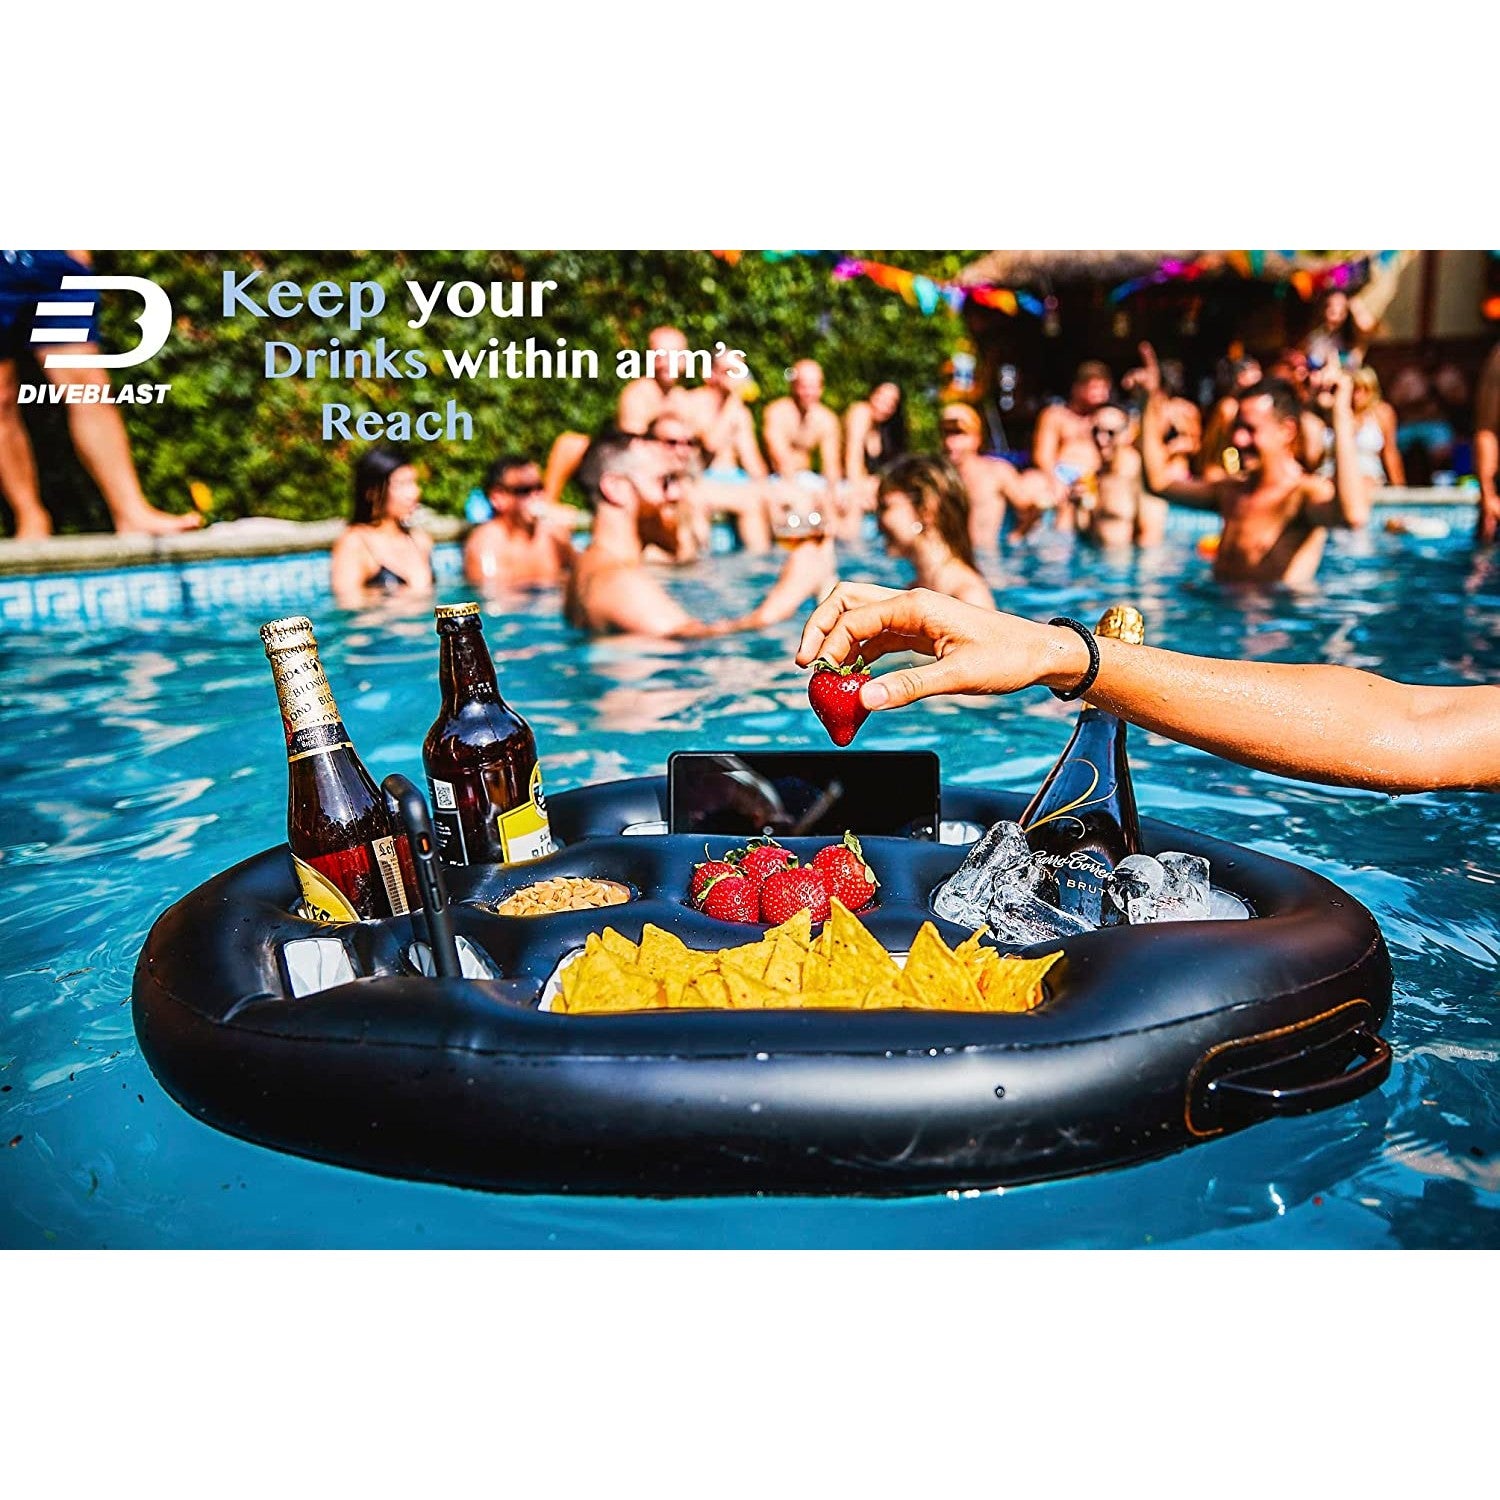 A black floating food and drink tray in a pool with people in the background.